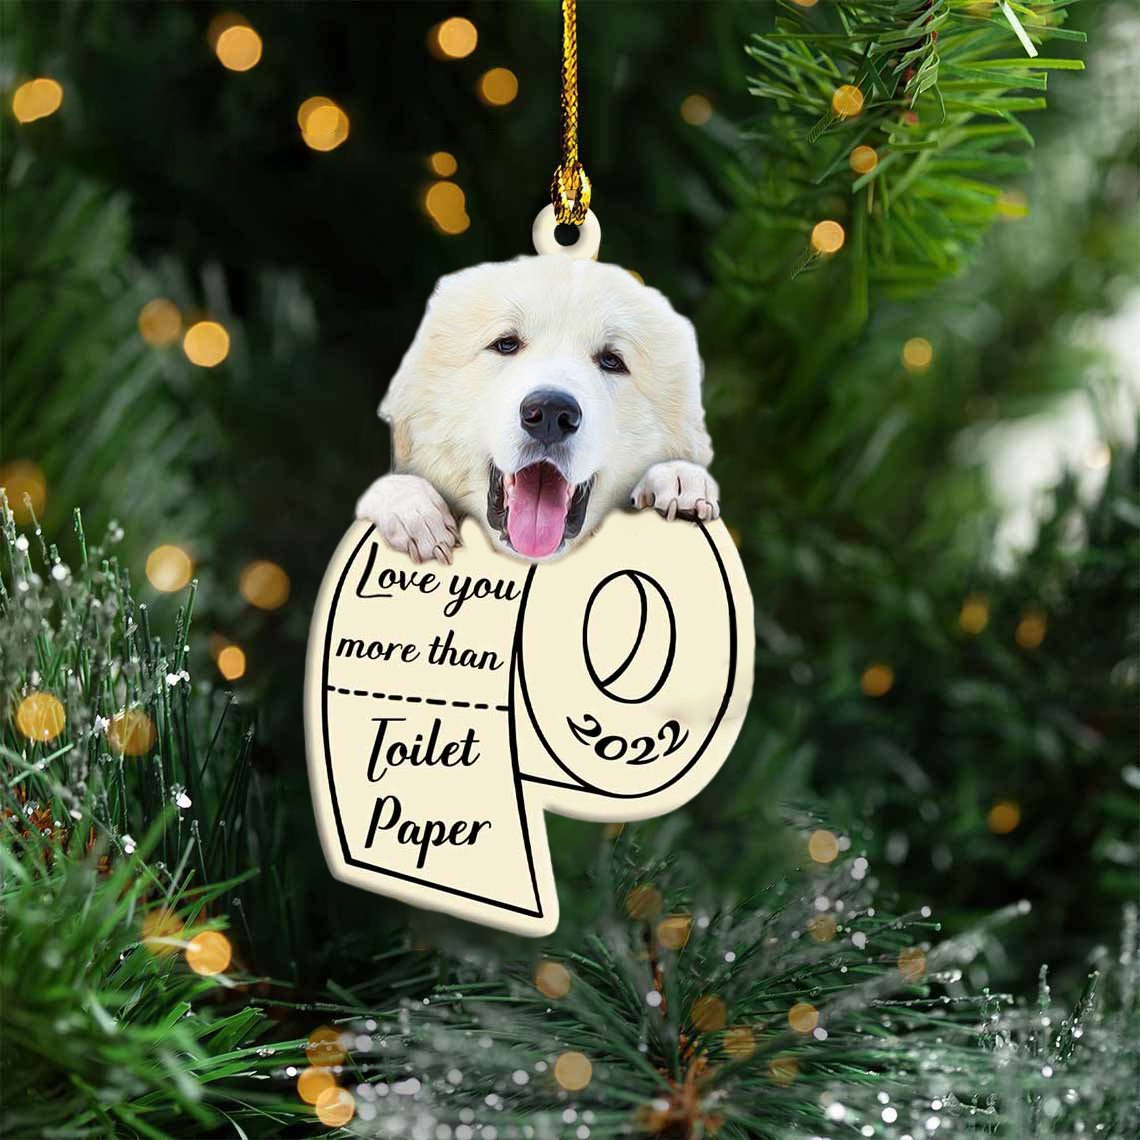 Great Pyrenees Love You More Than Toilet Paper 2022 Hanging Ornament